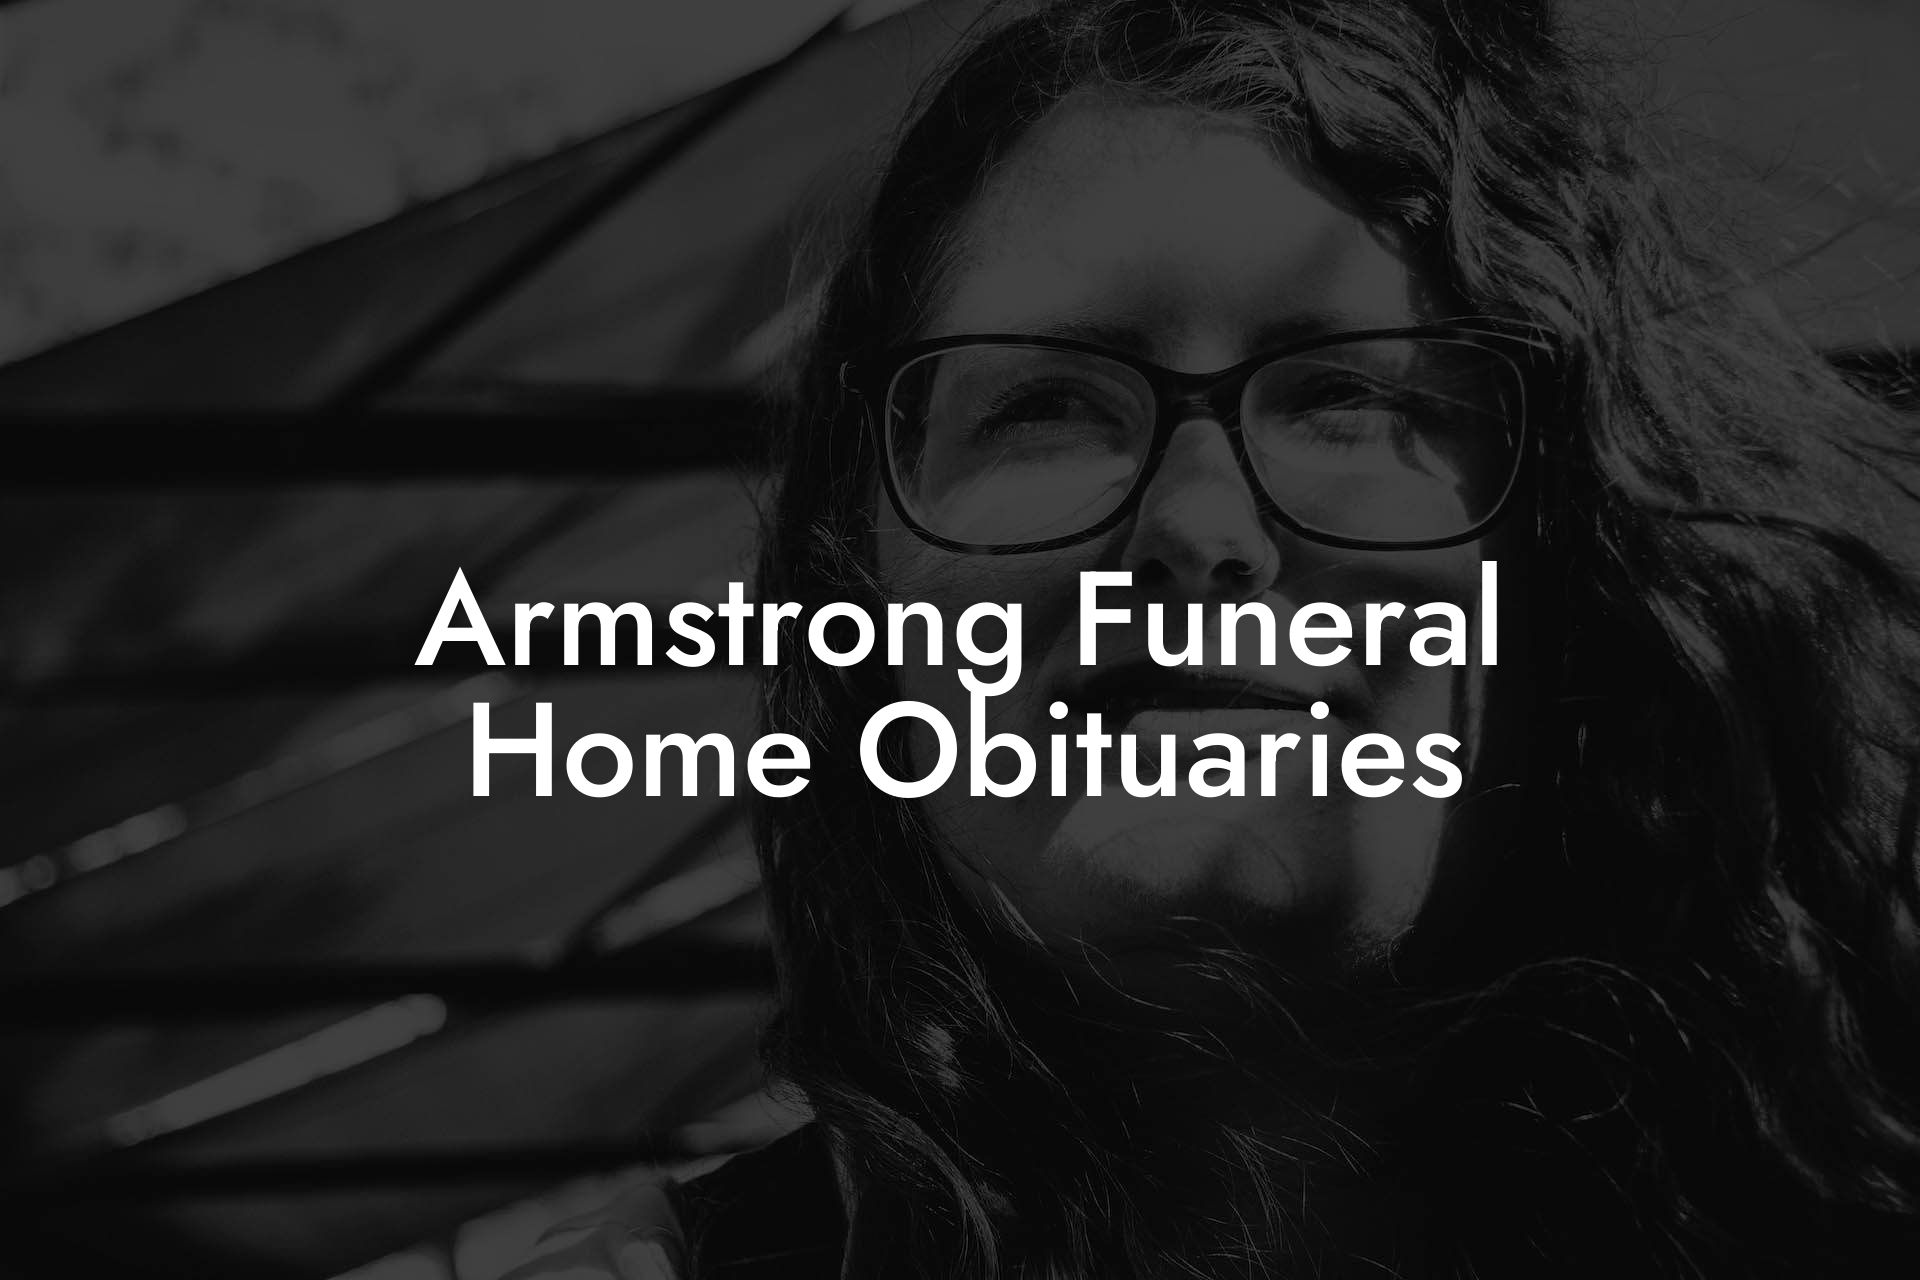 Armstrong Funeral Home Obituaries